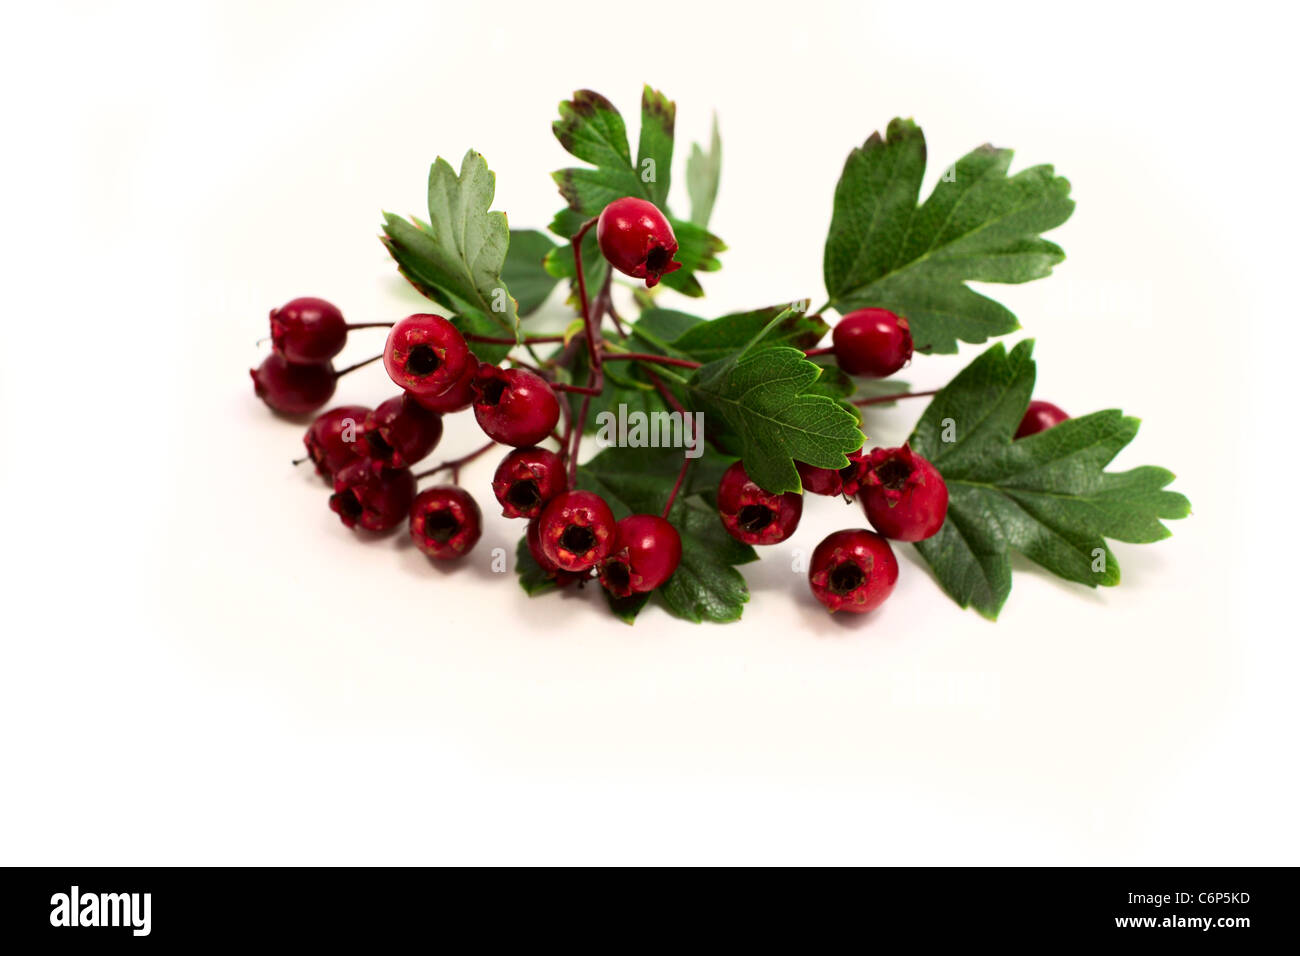 hawthorn berries on white background Stock Photo